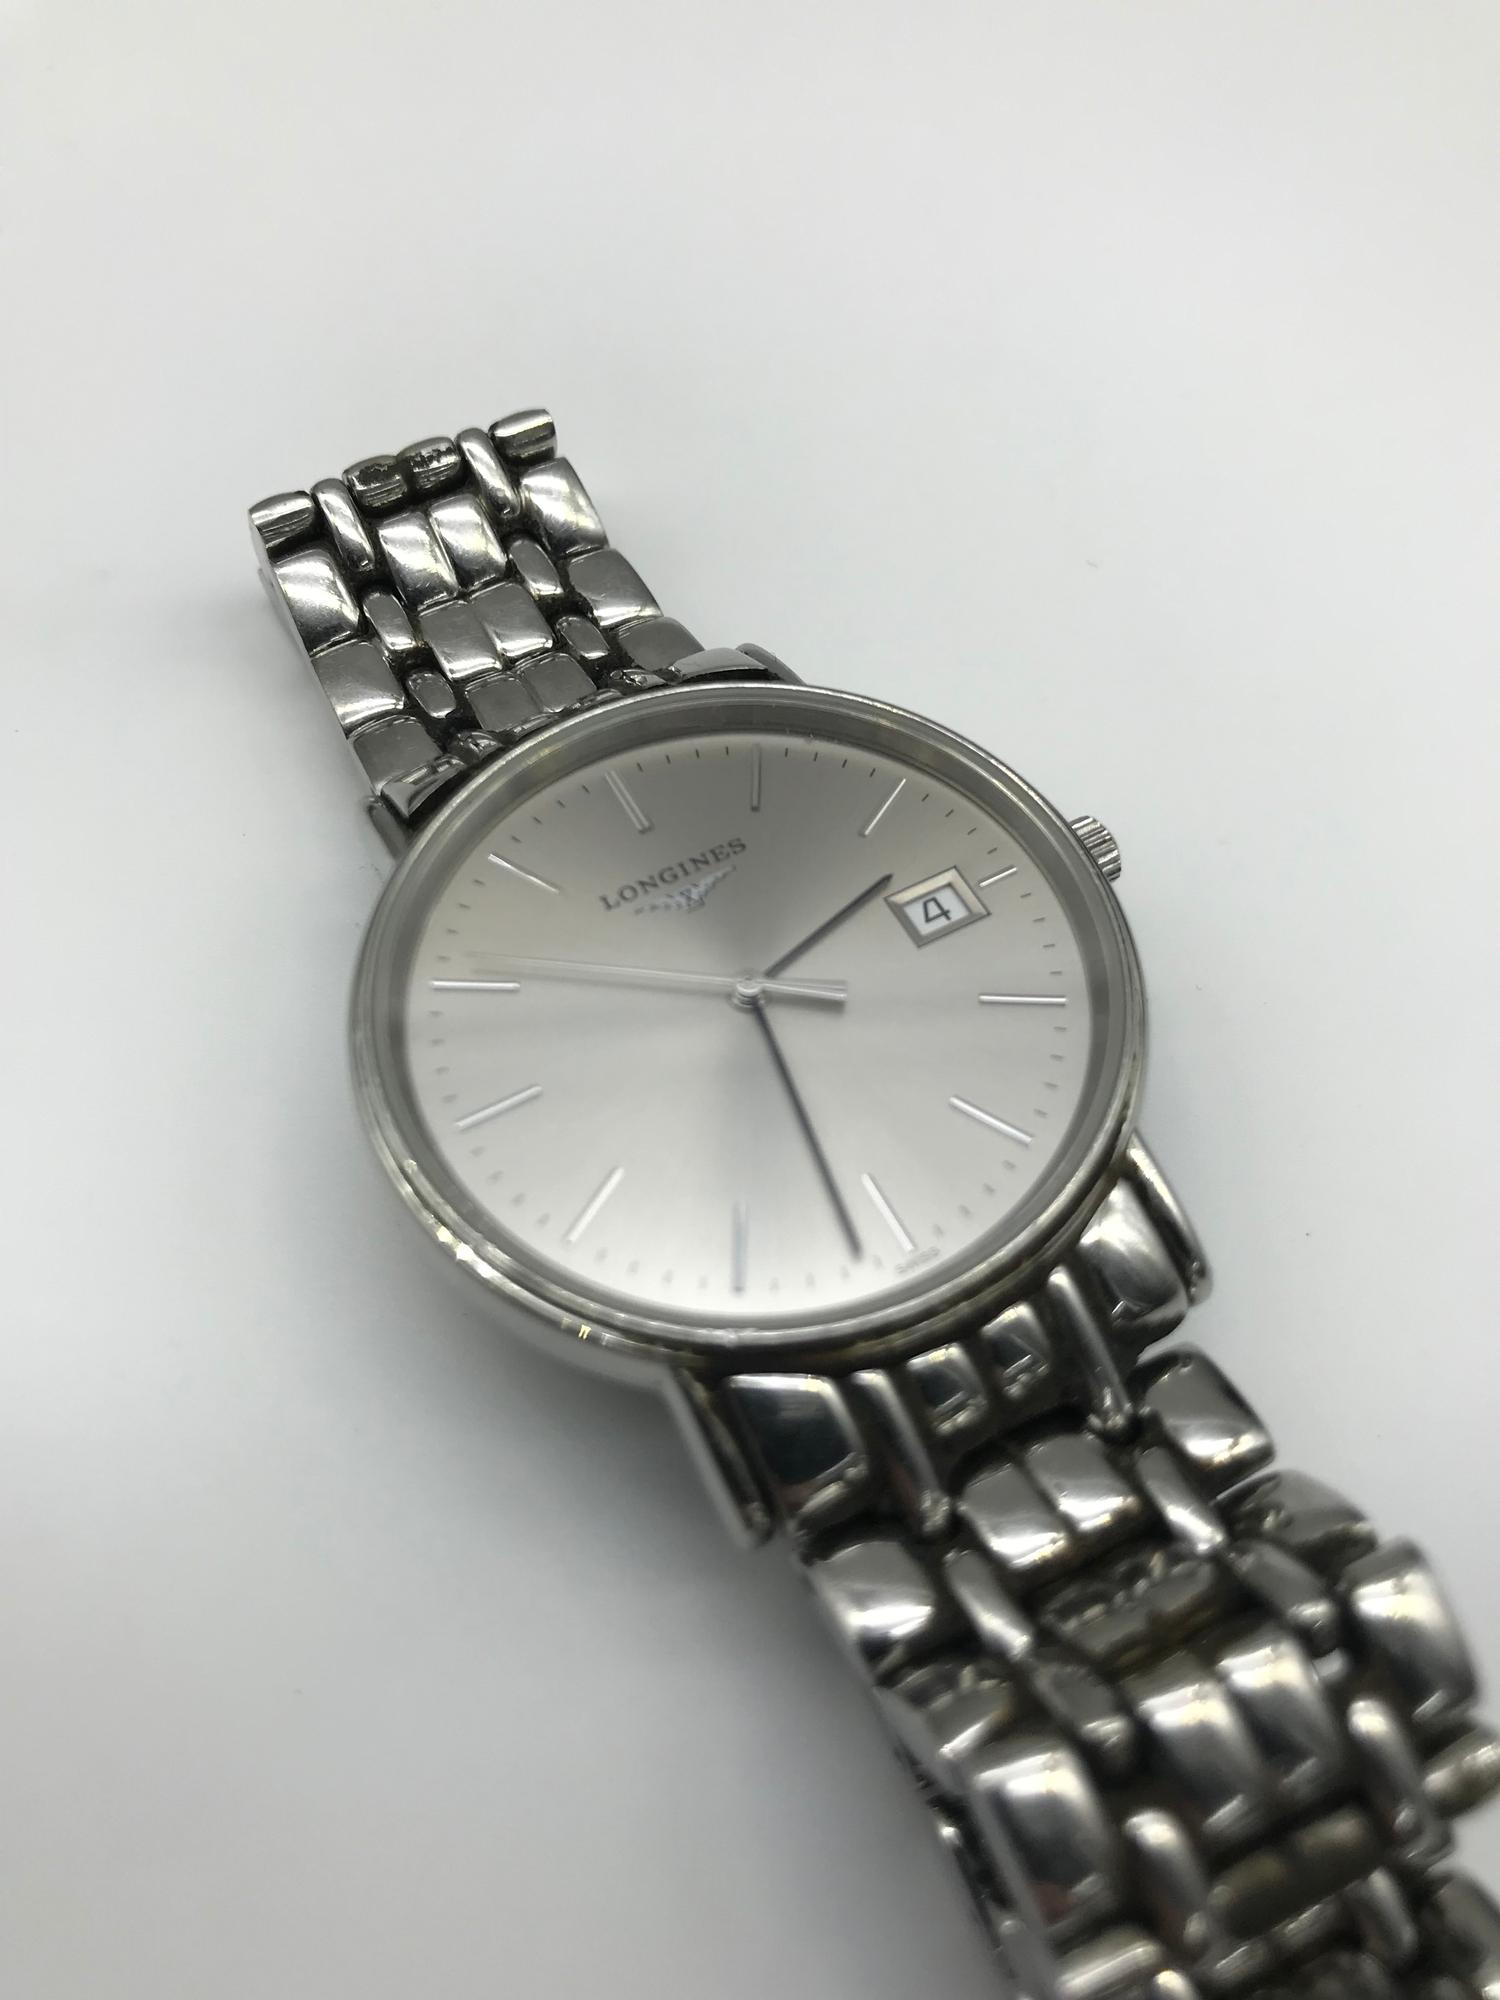 Gents Longines Presence watch. L4.720.4. In a working condition. - Image 2 of 3